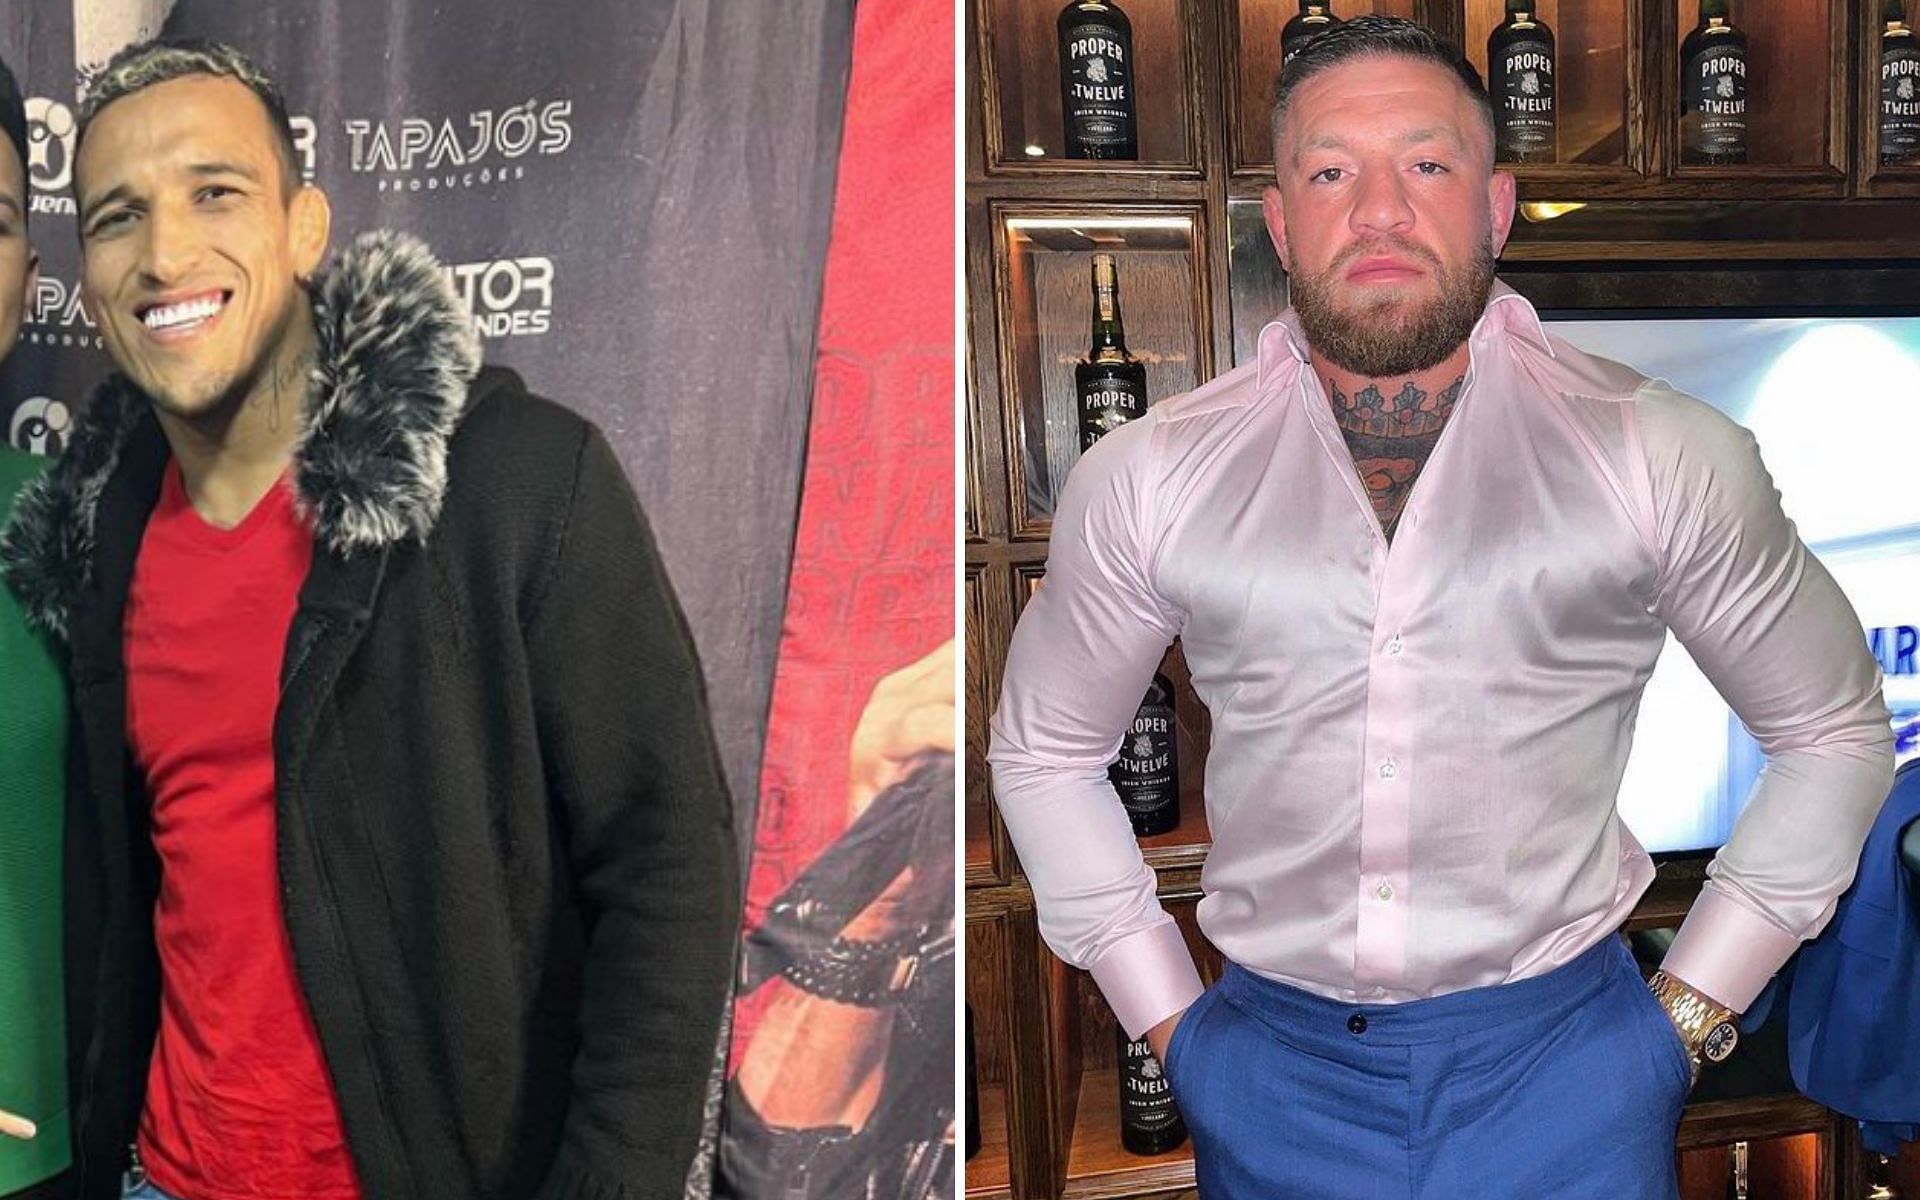 Charles Oliveira (L) and Conor McGregor (R) [Images Courtesy: @charlesdobronxs and @thenotoriousmma on Instagram]